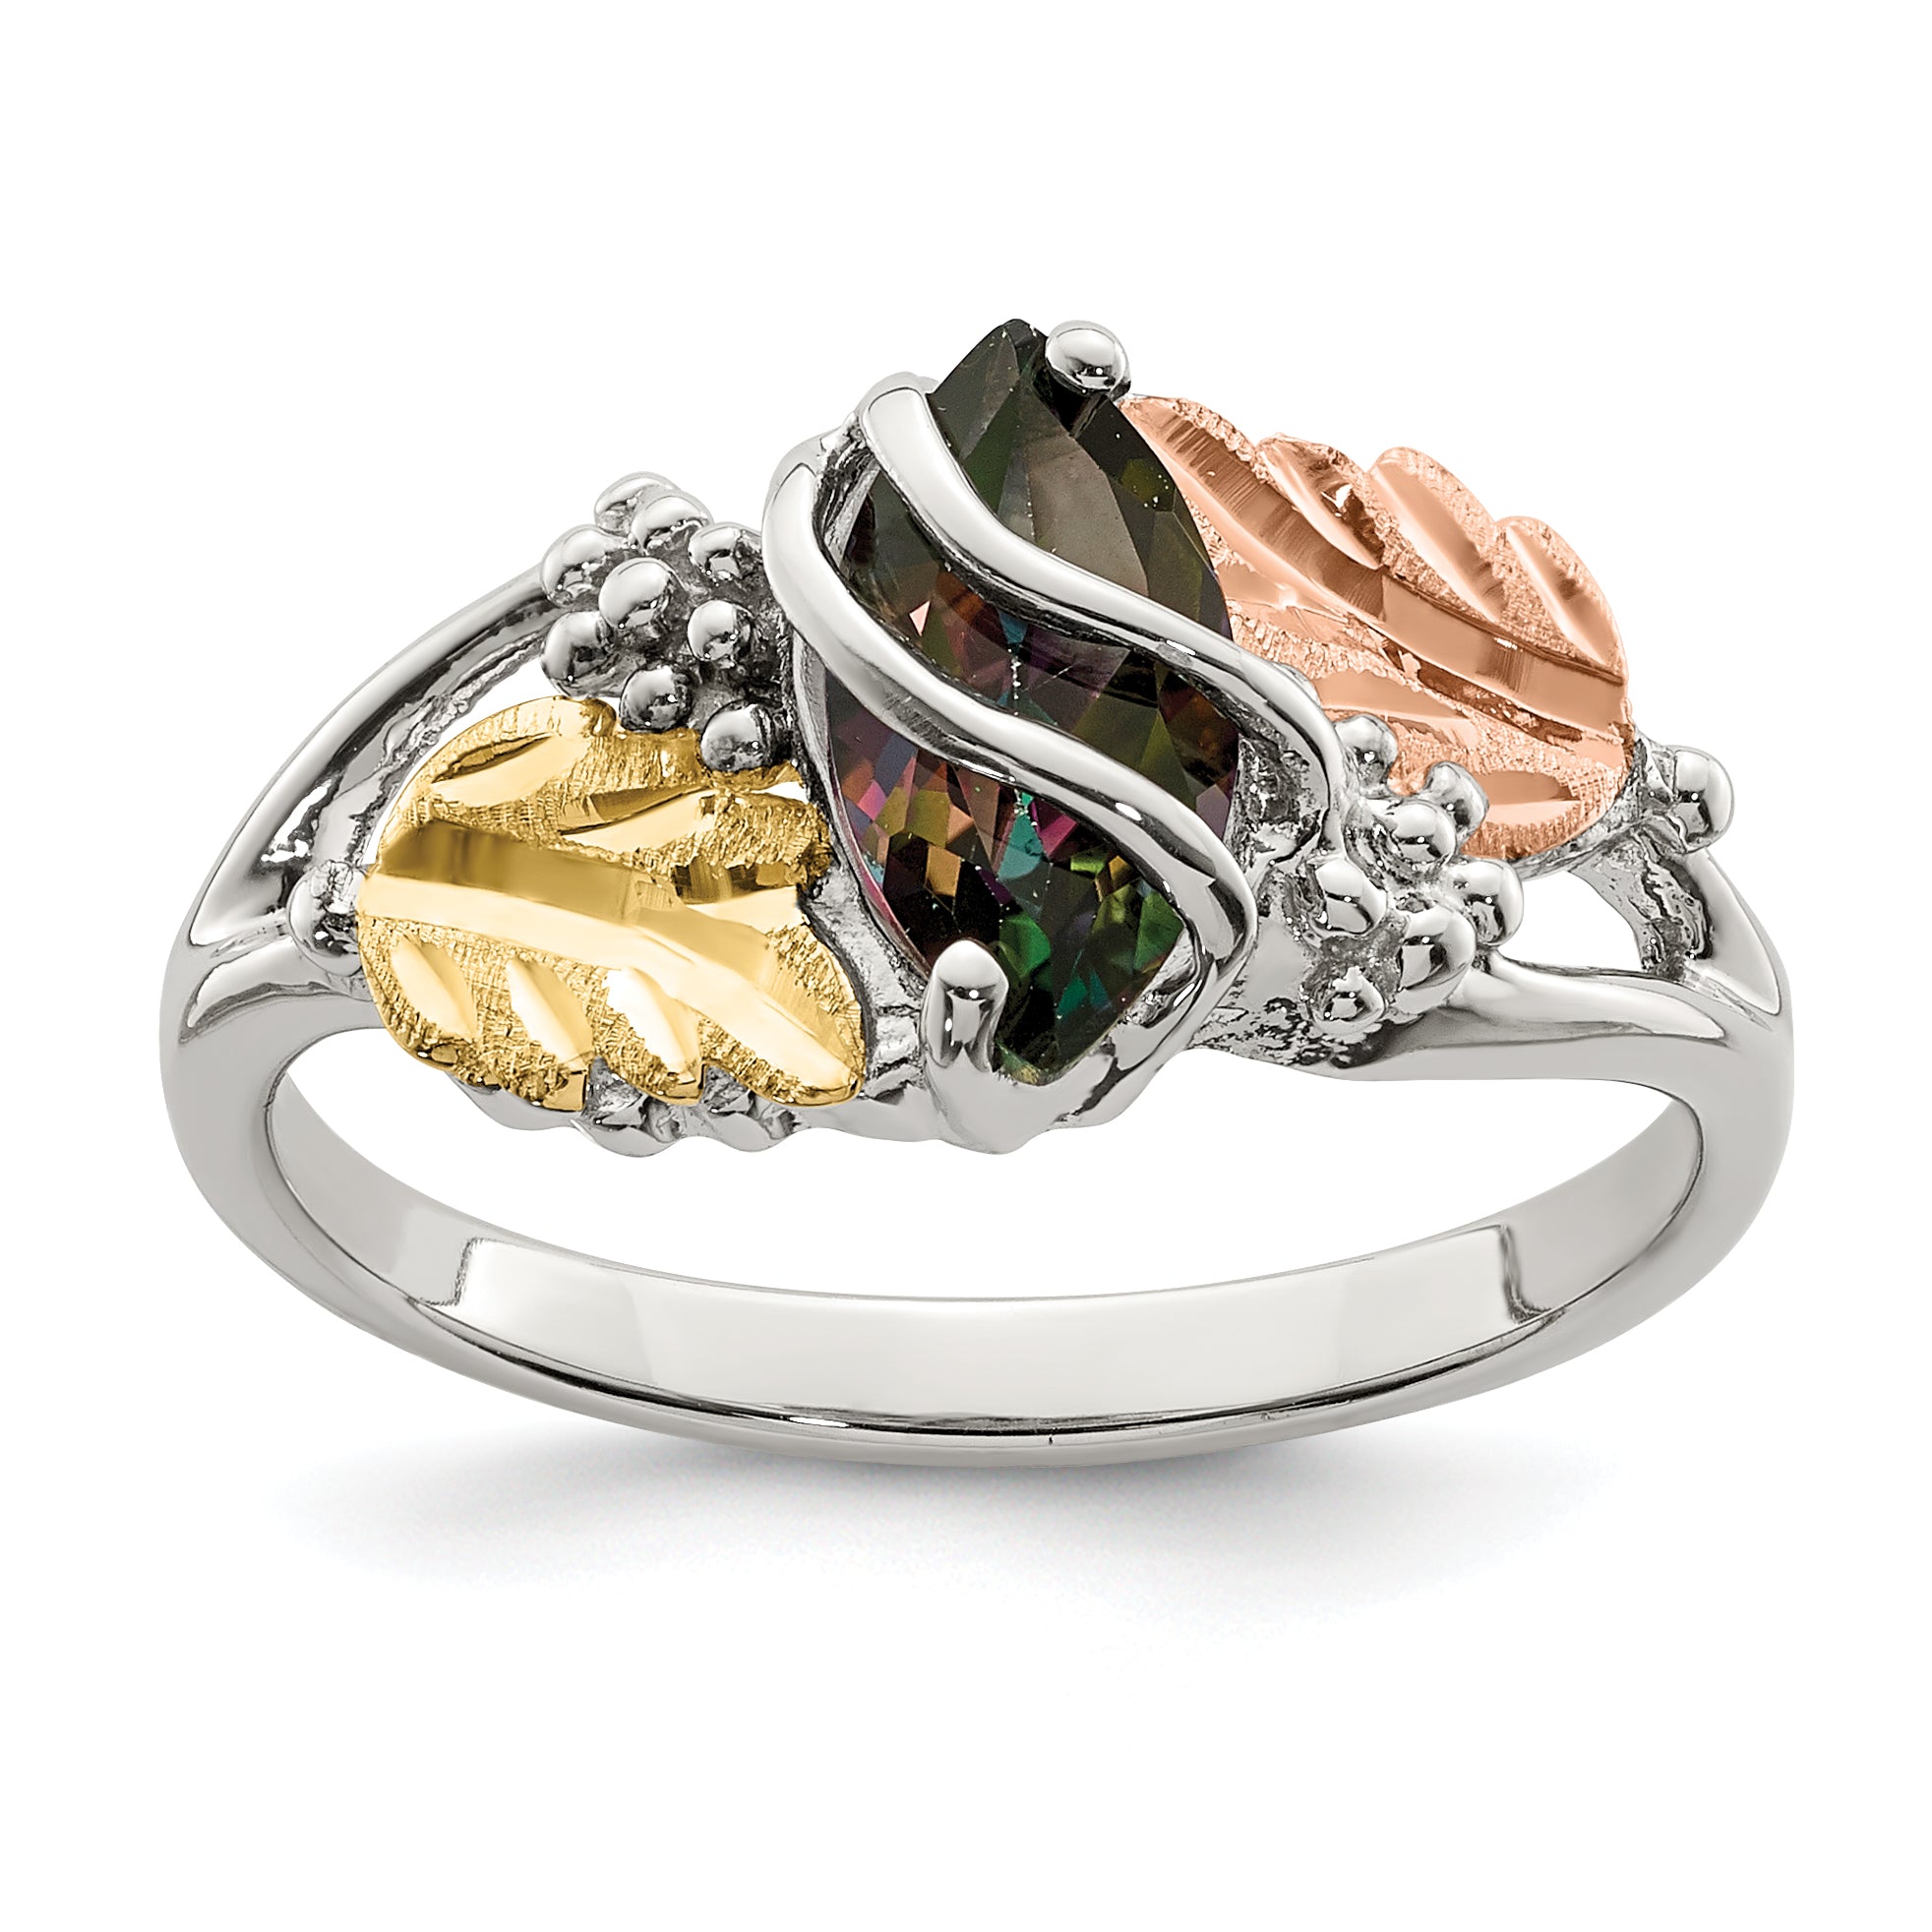 Landstrom's Mt. Rushmore Black Hills Sterling Silver 12K Gold Accents Mystic Fire Topaz Ring